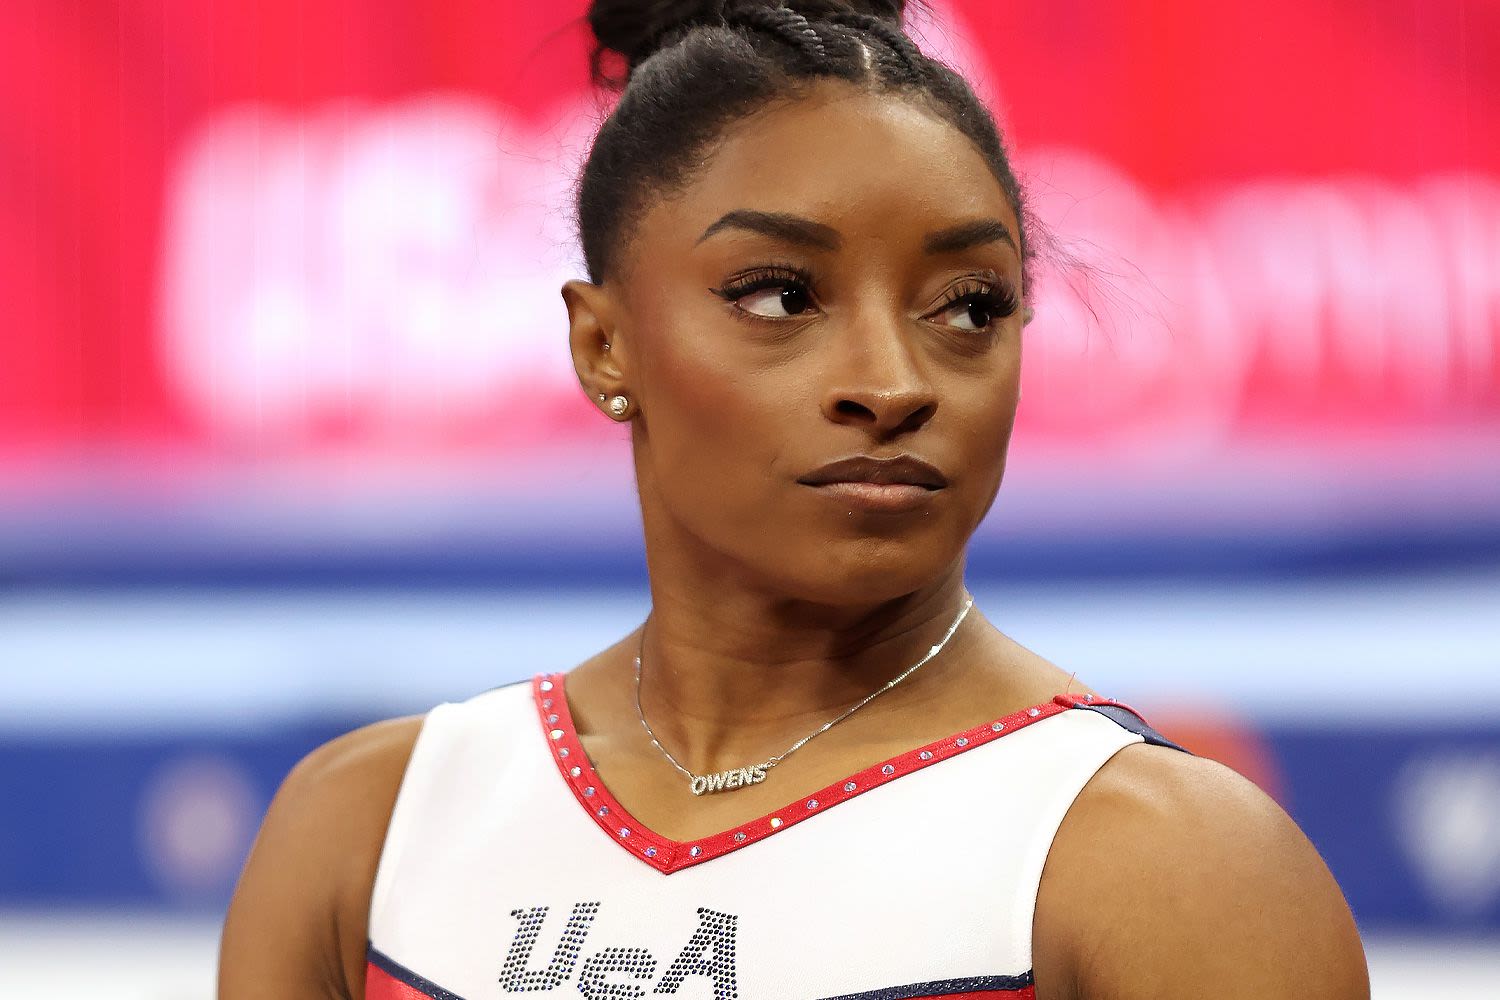 Simone Biles Will Compete at Paris Olympics, Only the 4th Woman to Make 3 Gymnastics Teams